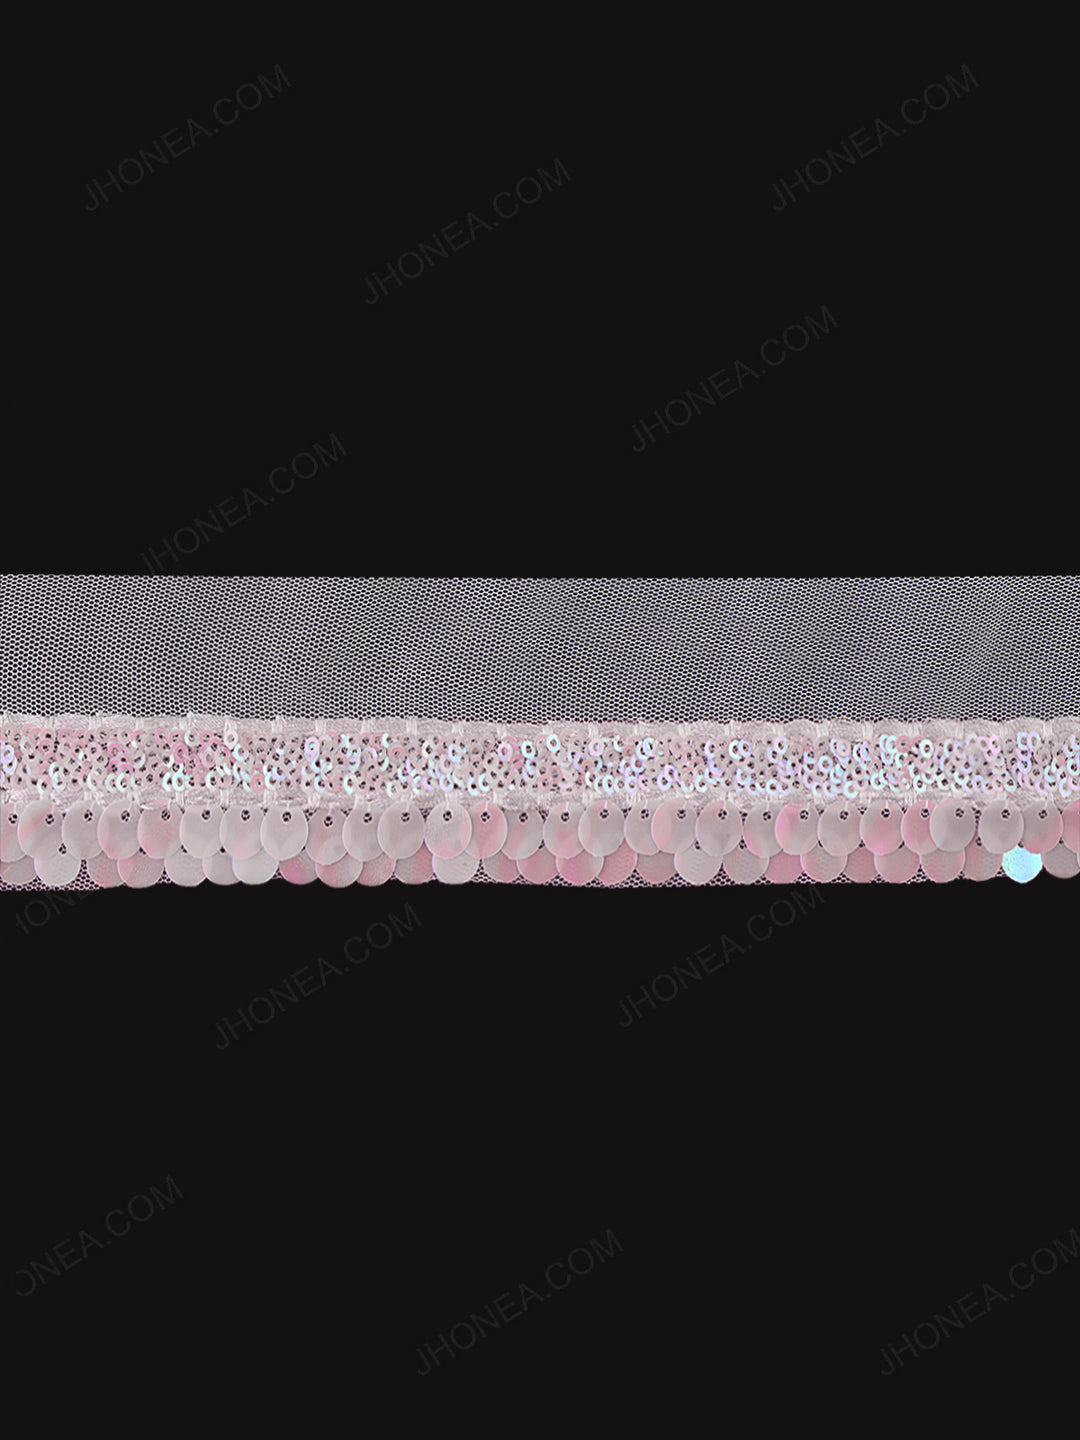  Shining Iridescent Reflective Sequins Lace